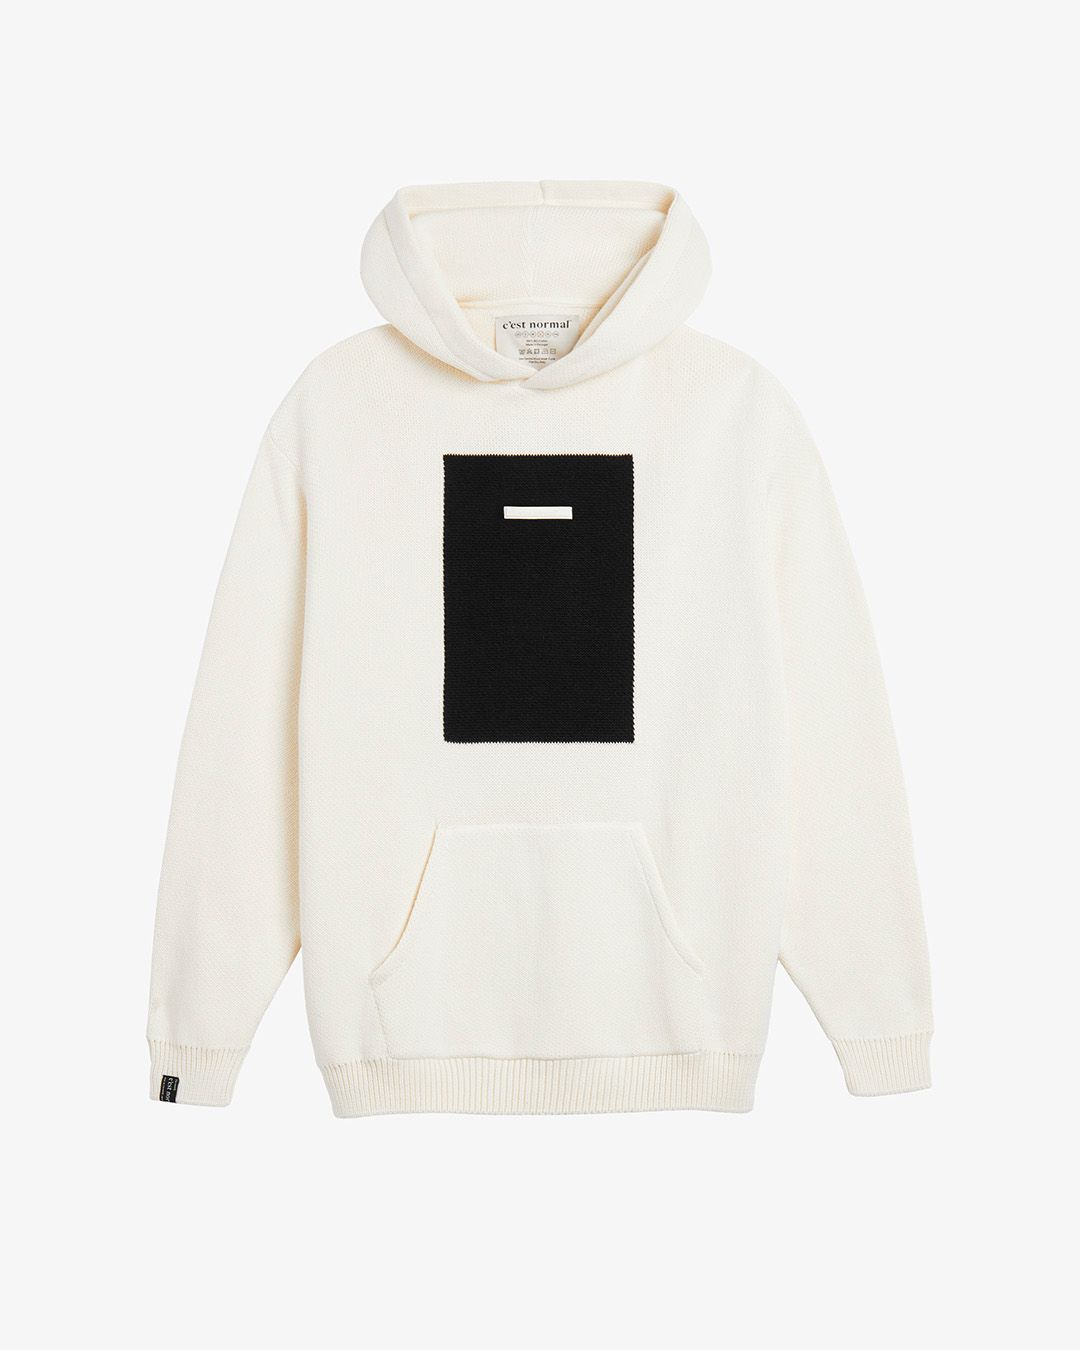 The Knitted Hoodie | c'est normal - Around here.